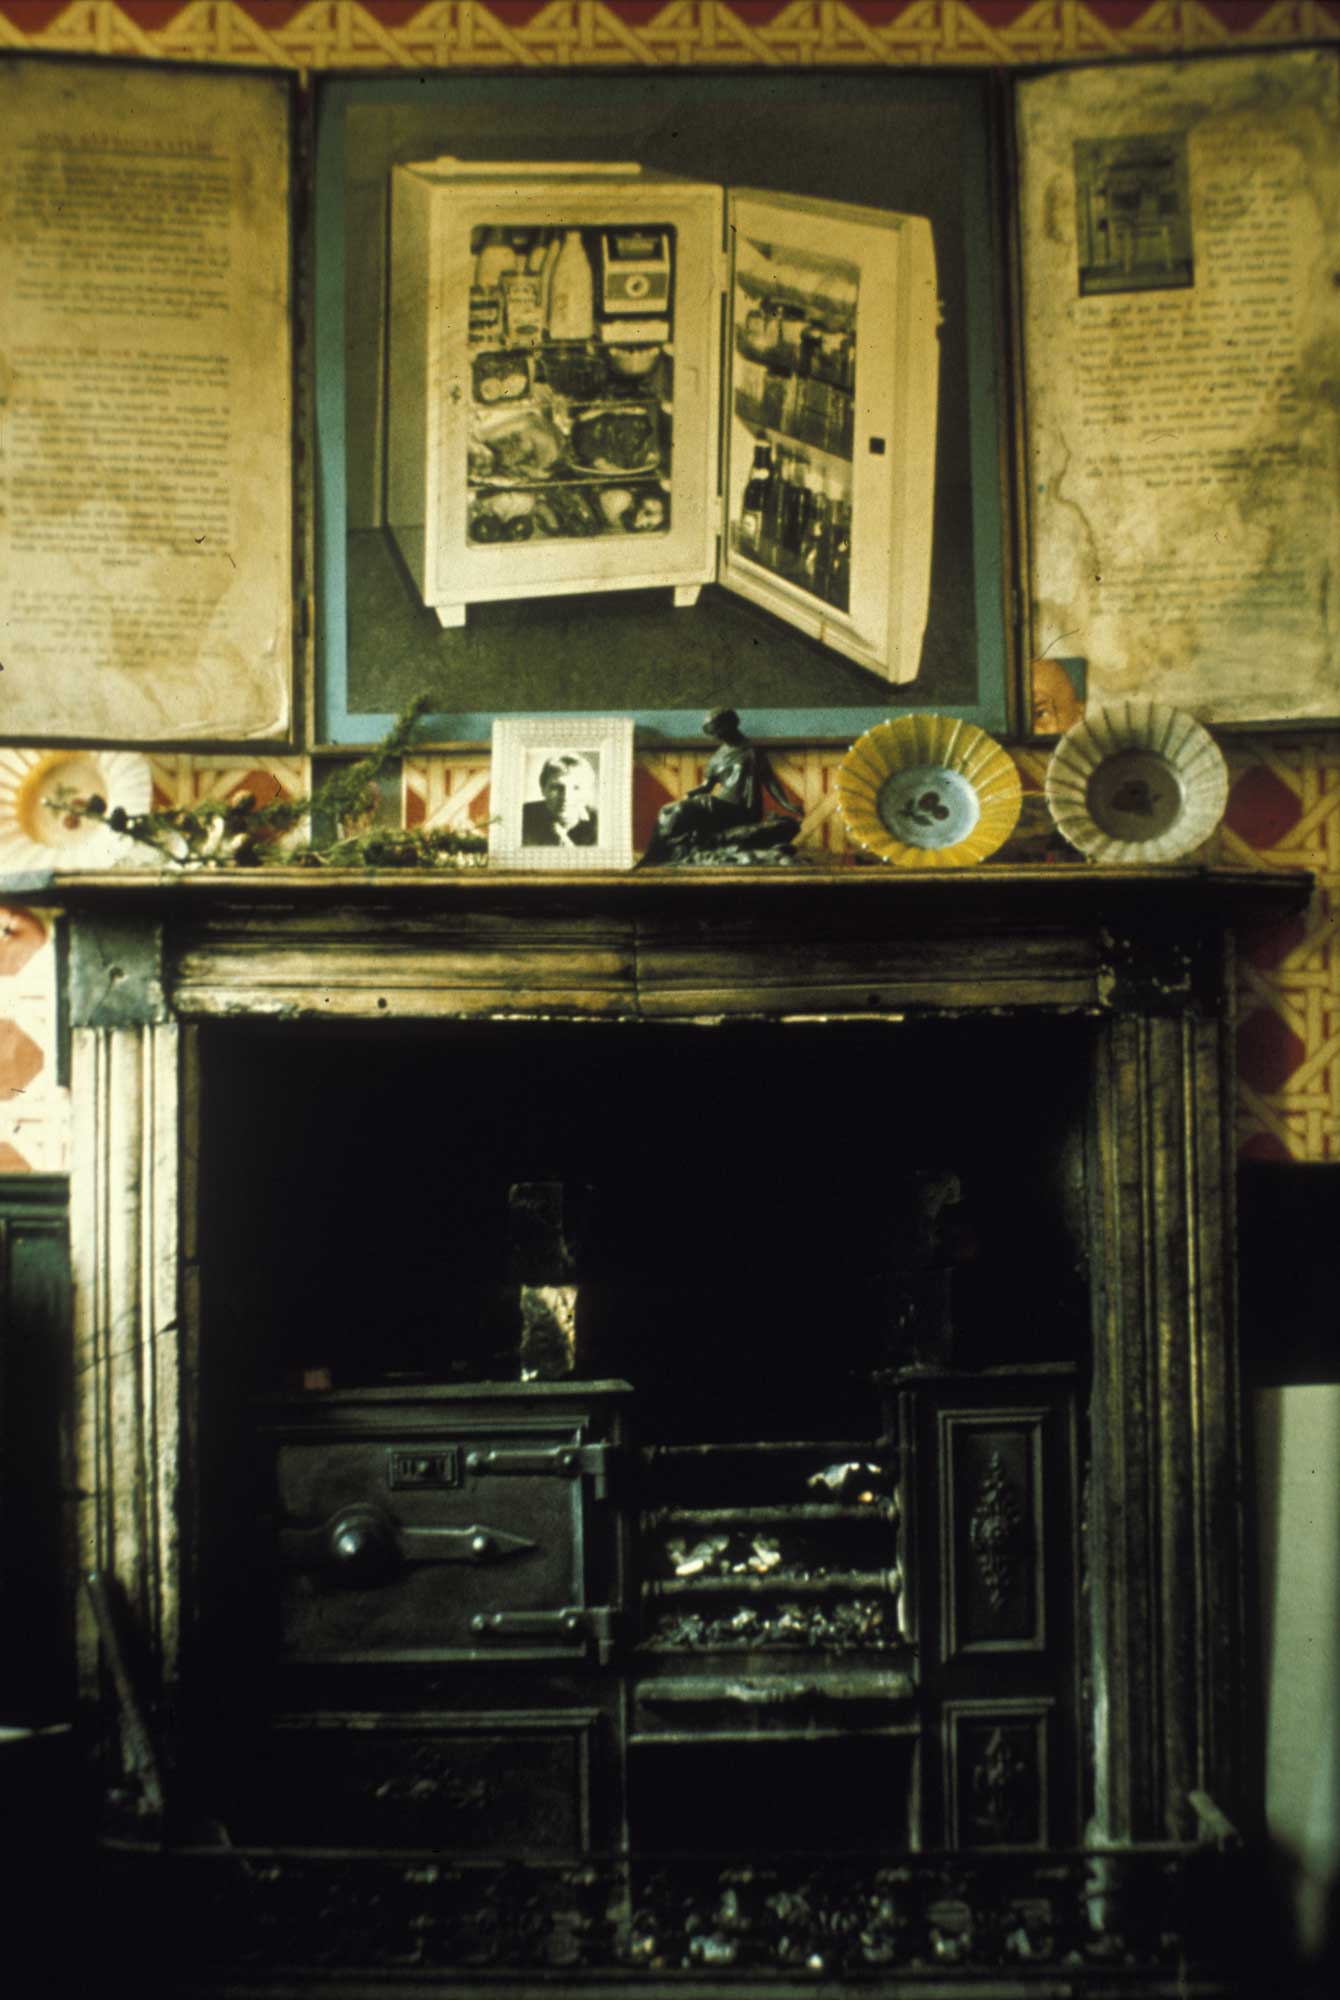 Fireplace at 6 Tolmers Square, 1975